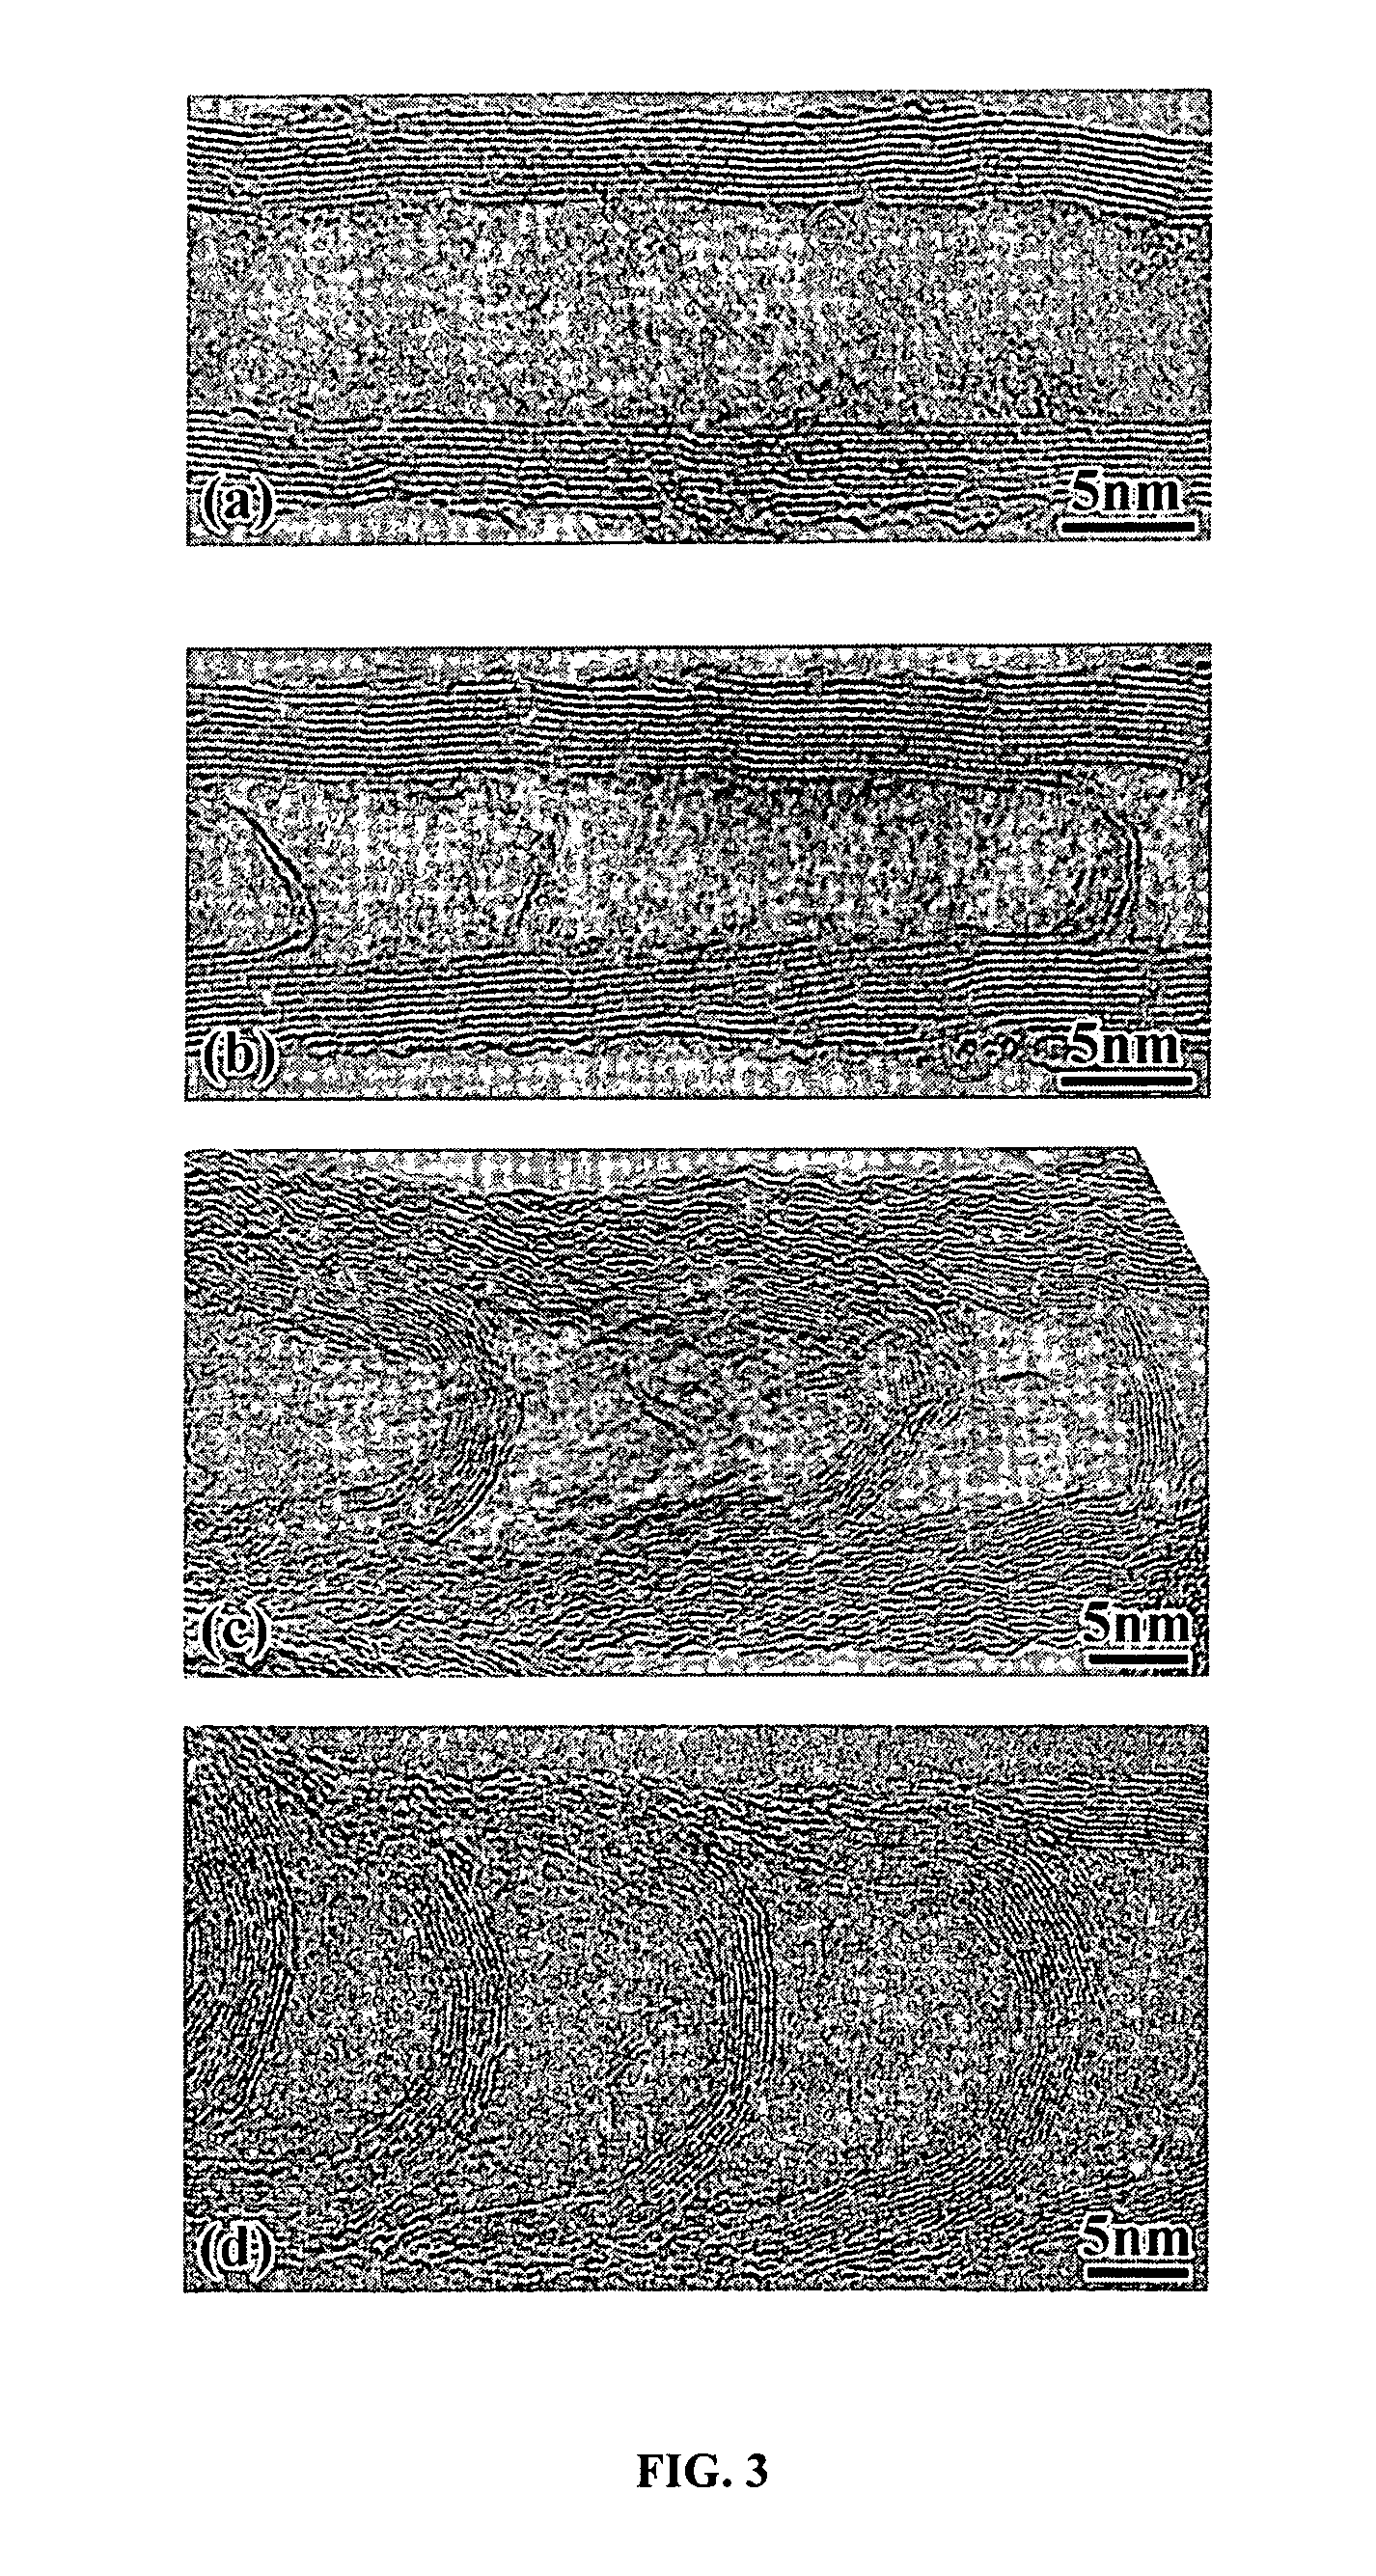 Varied morphology carbon nanotubes and method for their manufacture